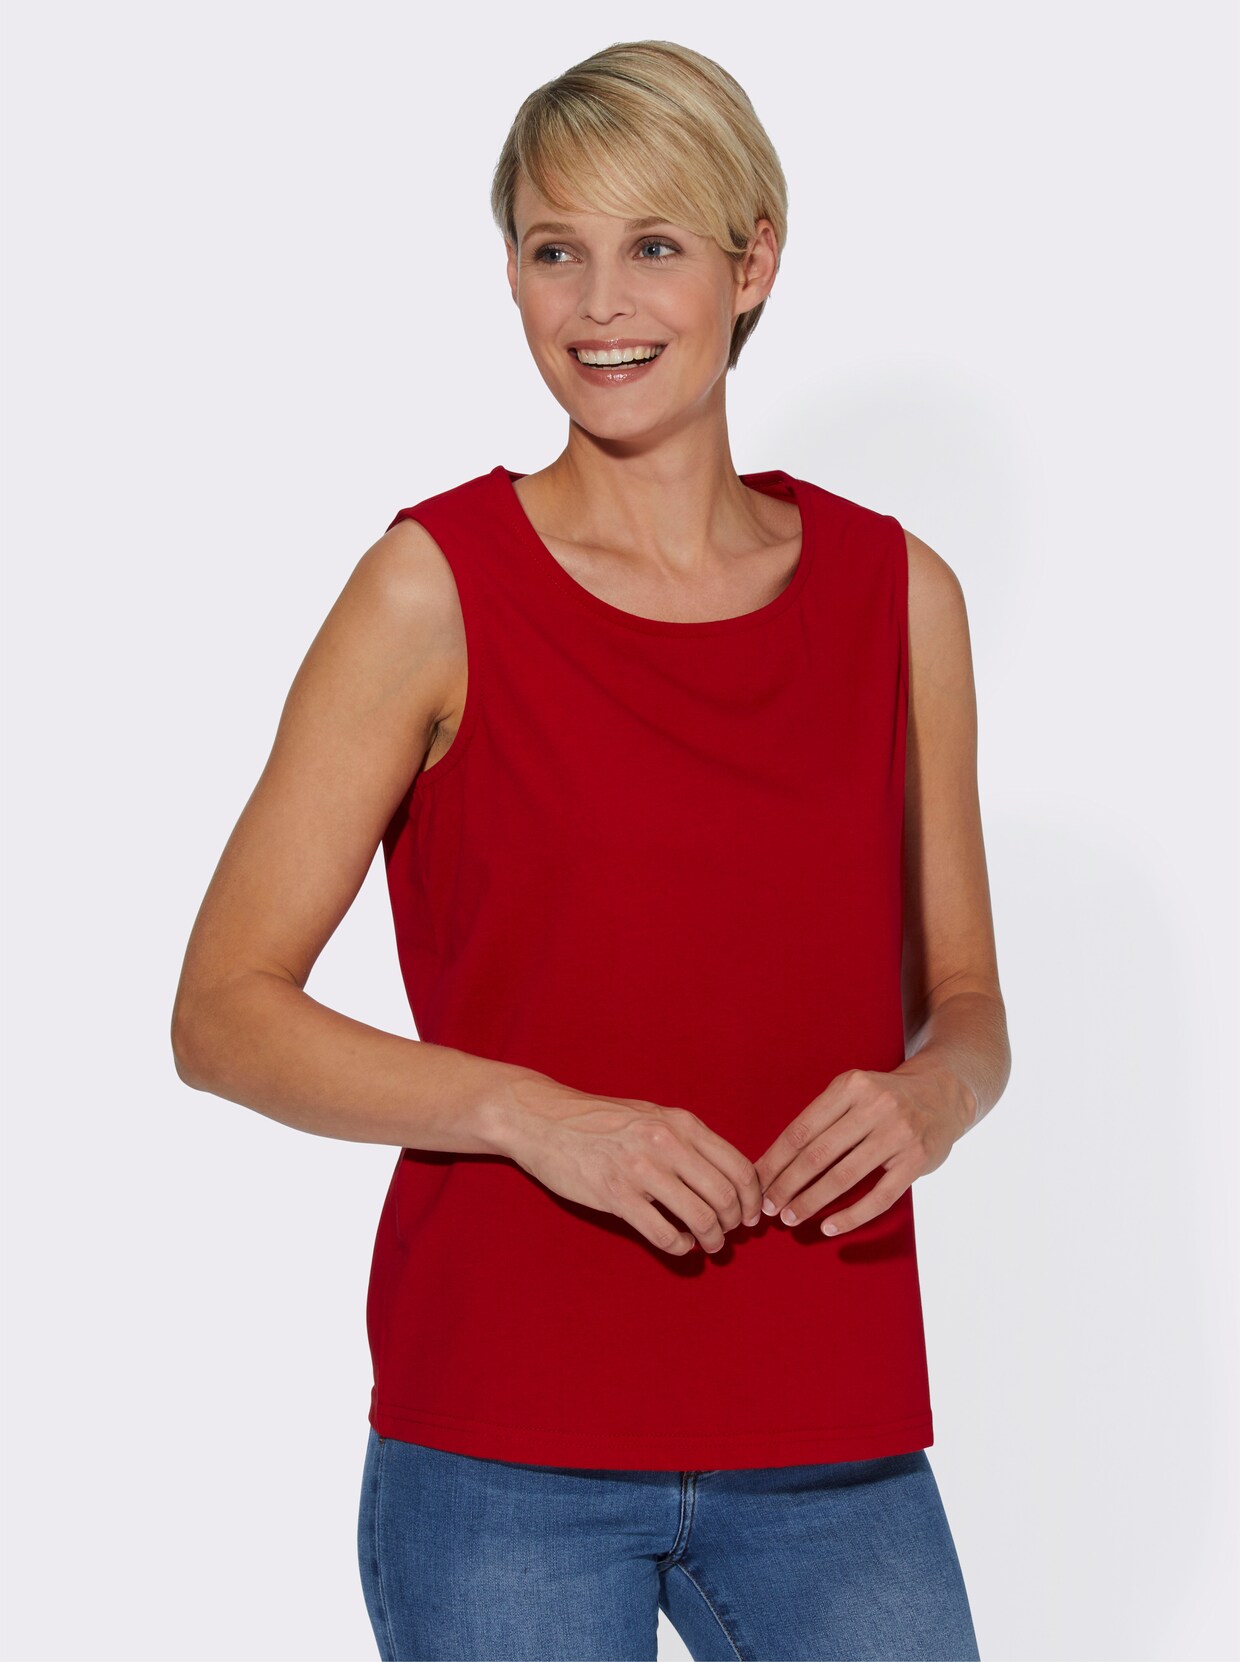 Shirttop - rood + rood gestippeld